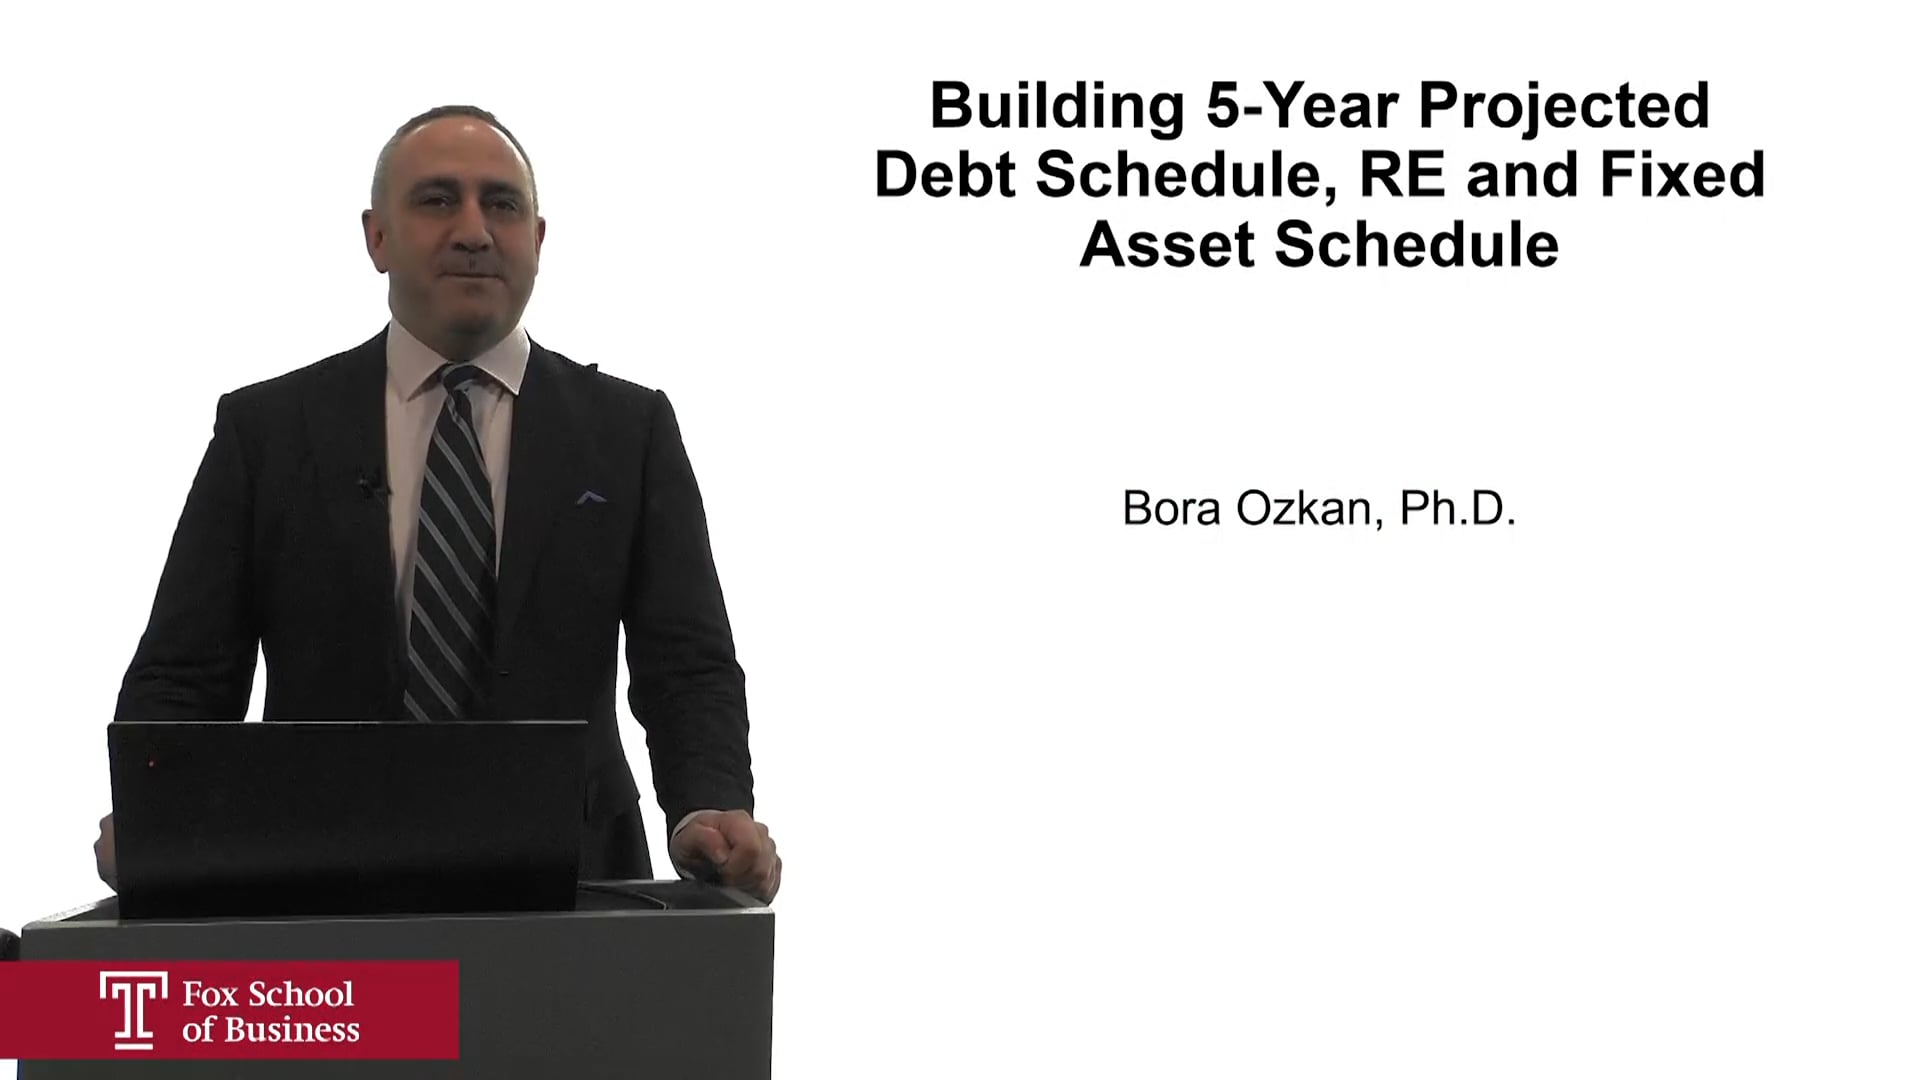 Building 5-Year Projected Debt Schedule, RE and Fixed Assets